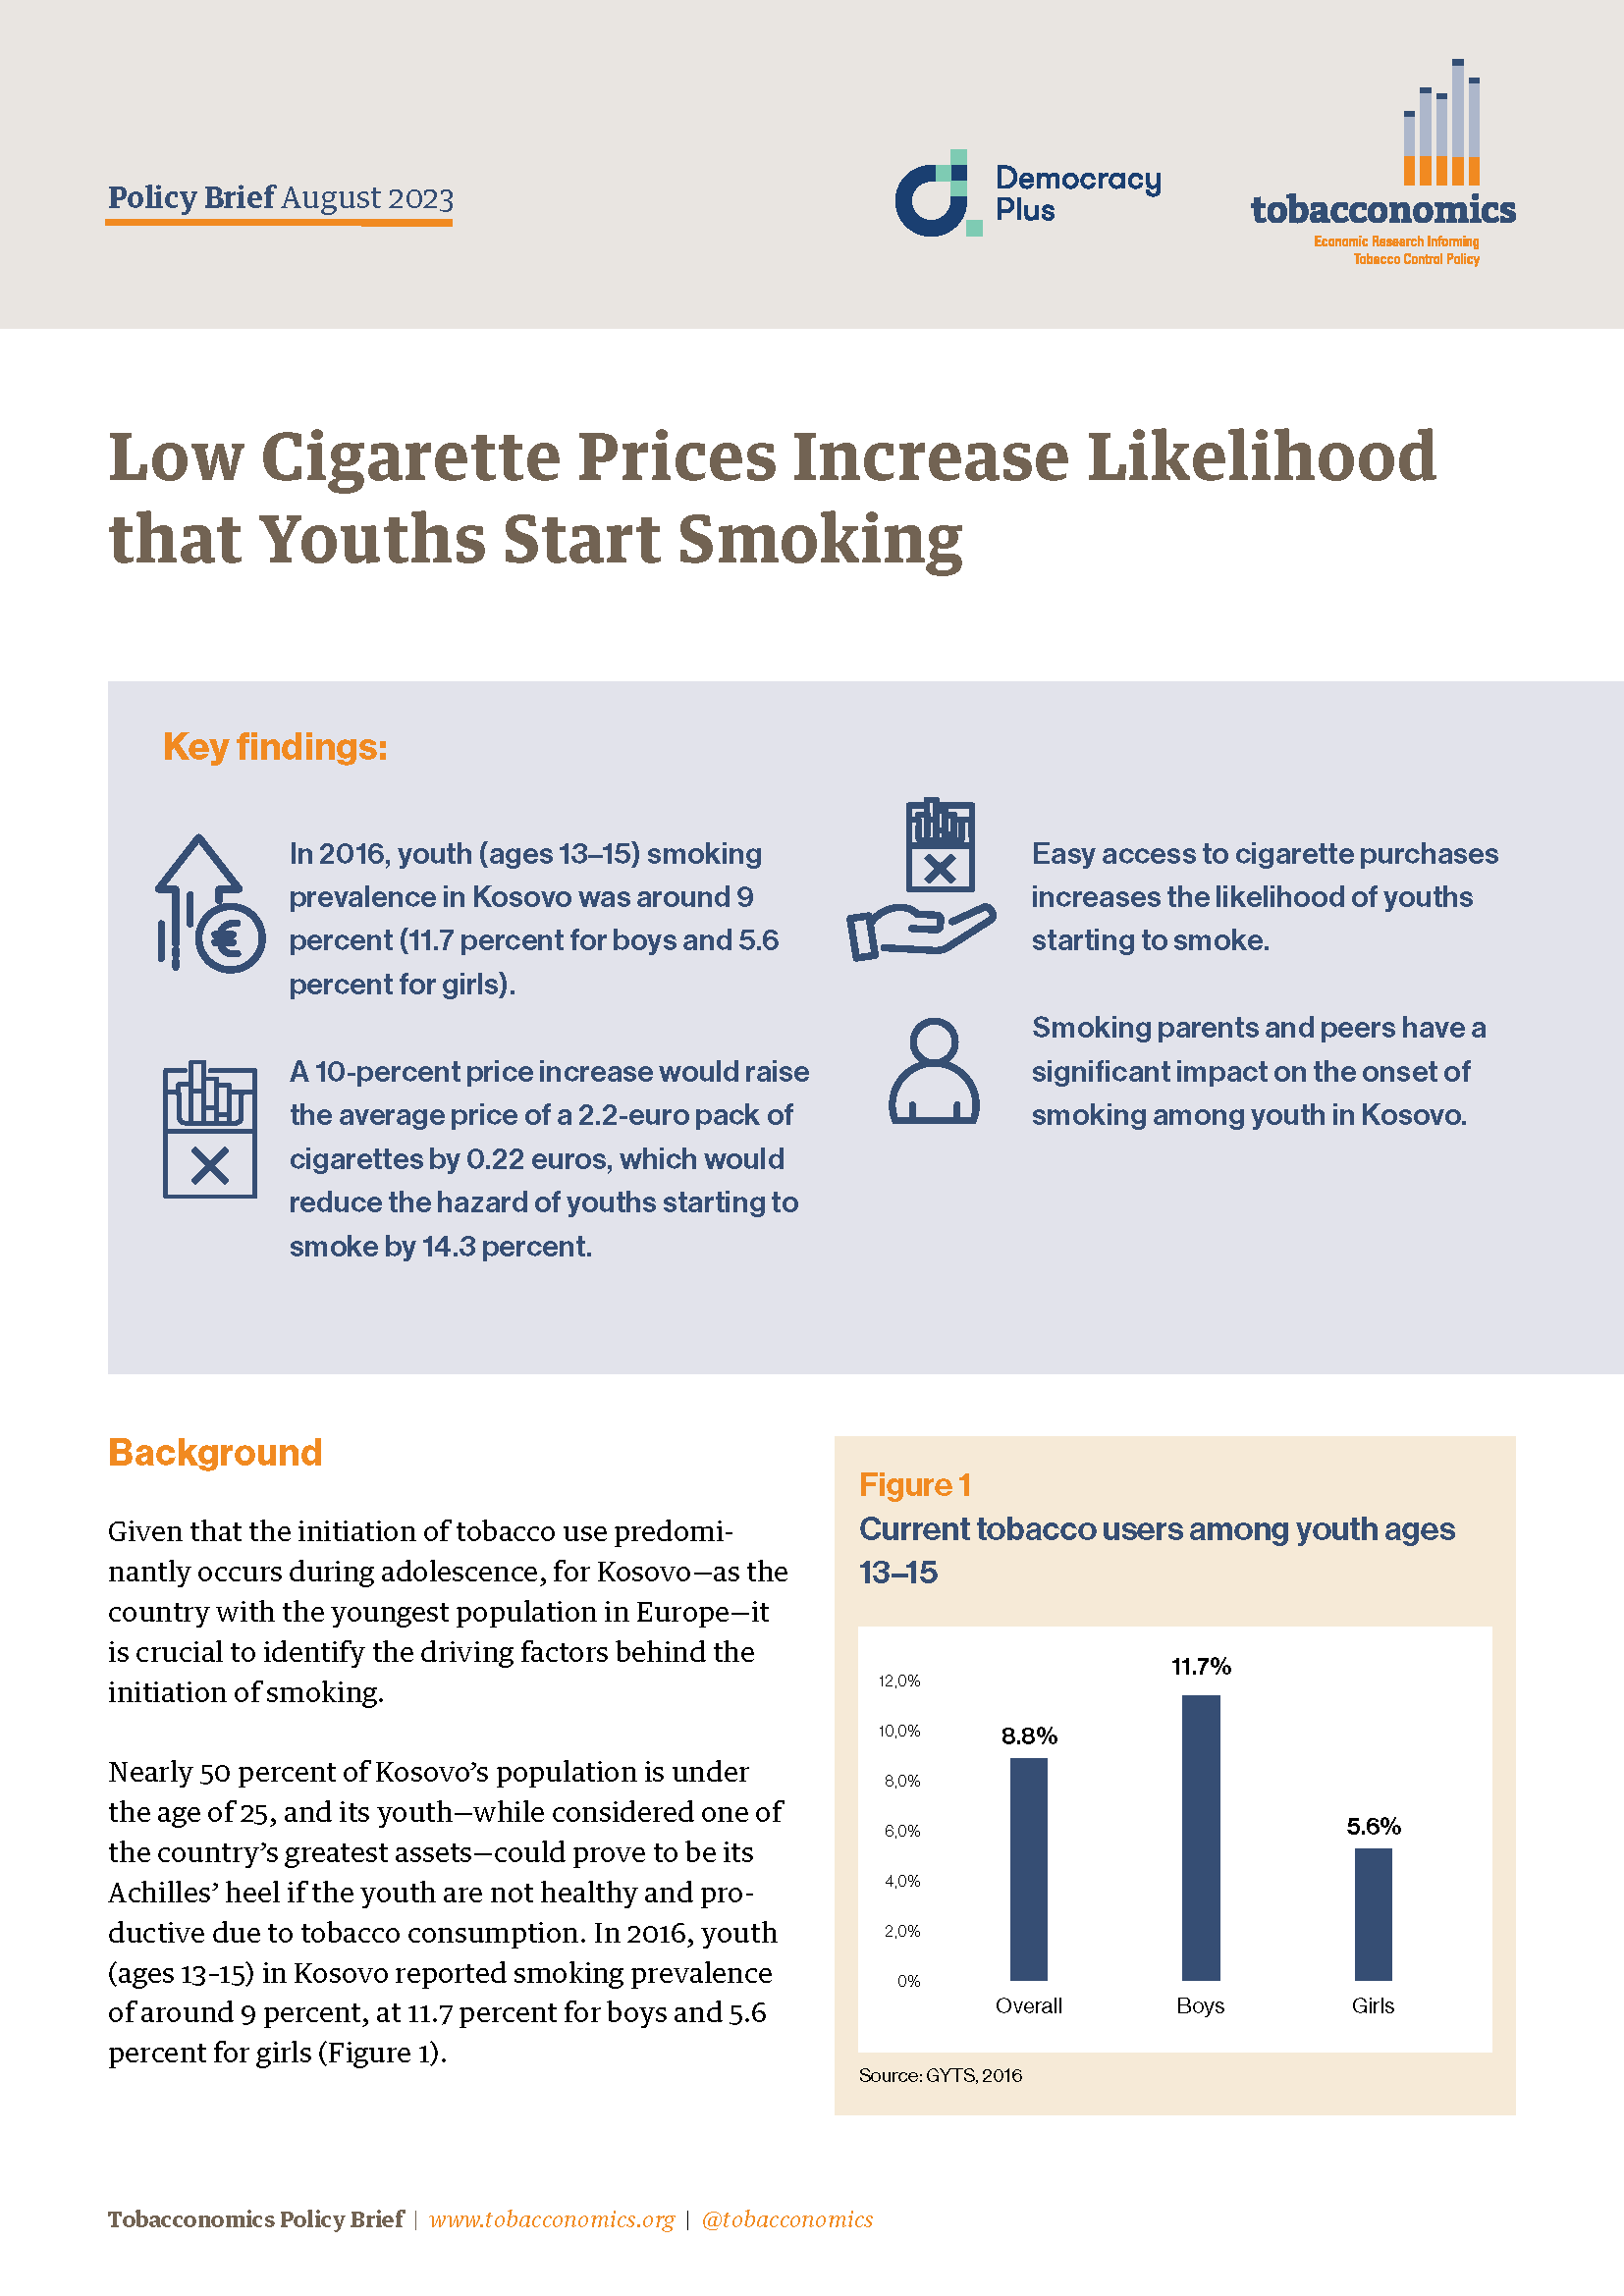 Policy Brief – Low Cigarette Prices Increase Likelihood that Youths Start Smoking